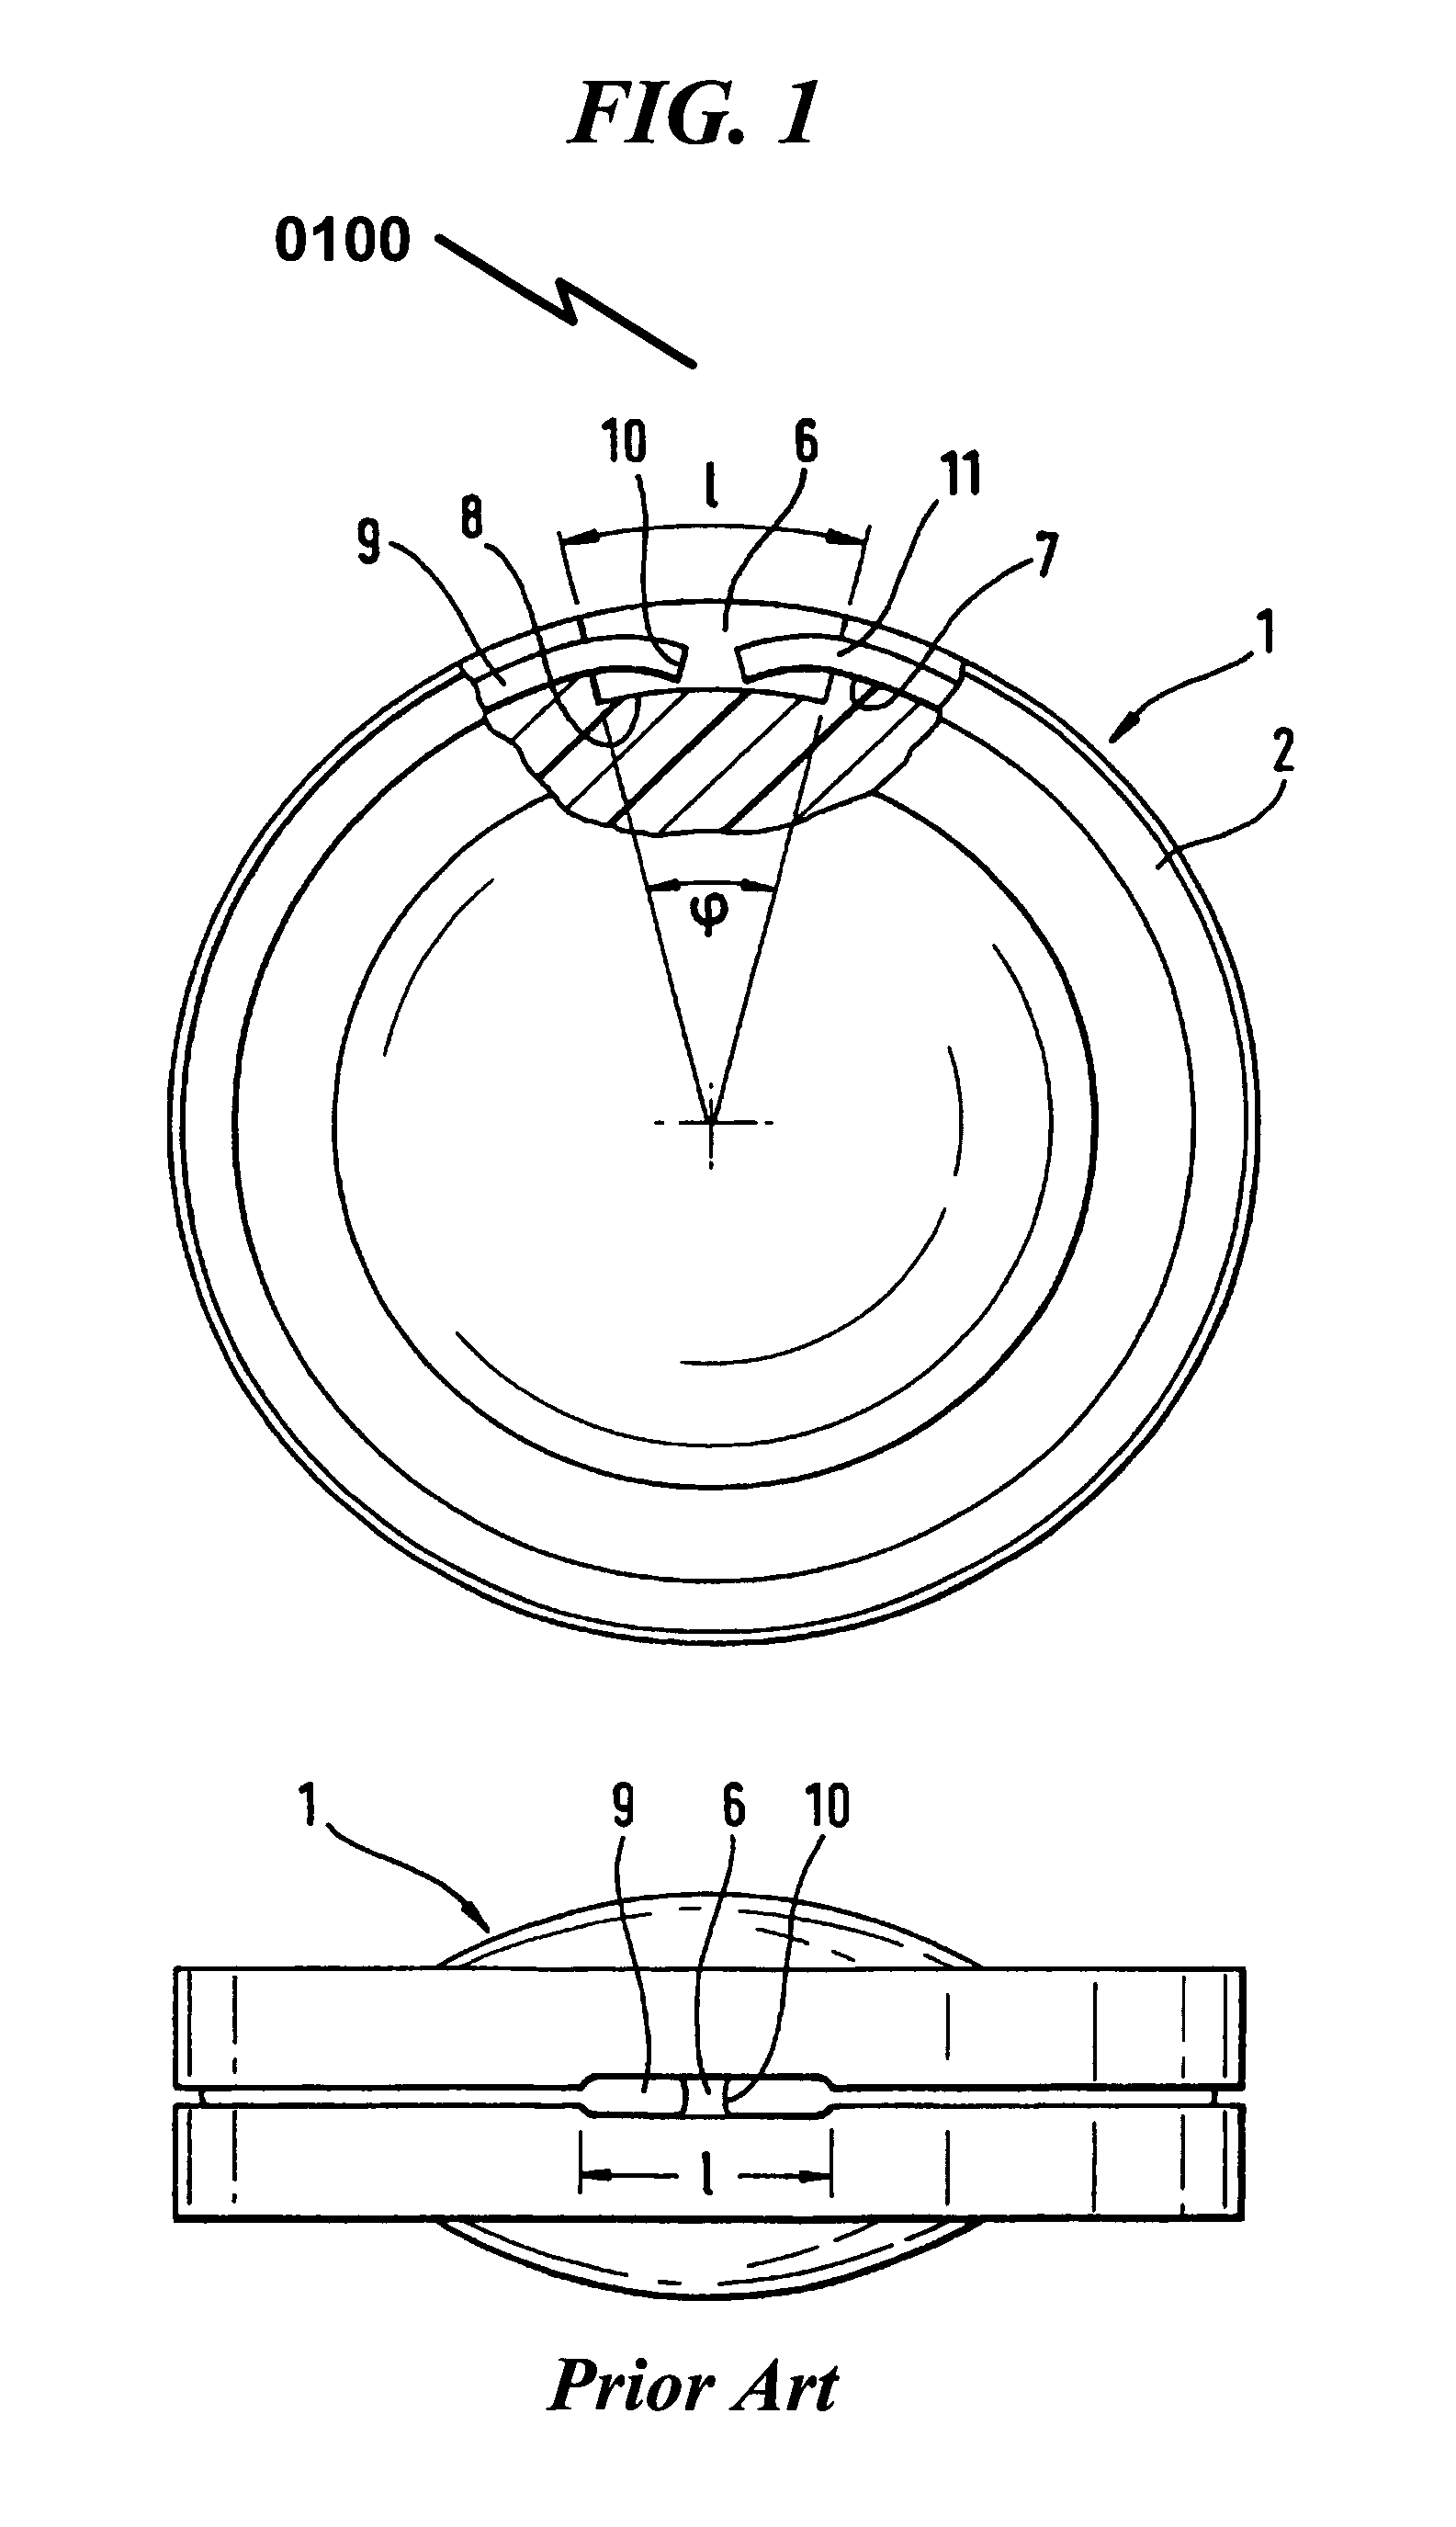 Artificial spinal disc replacement system and method